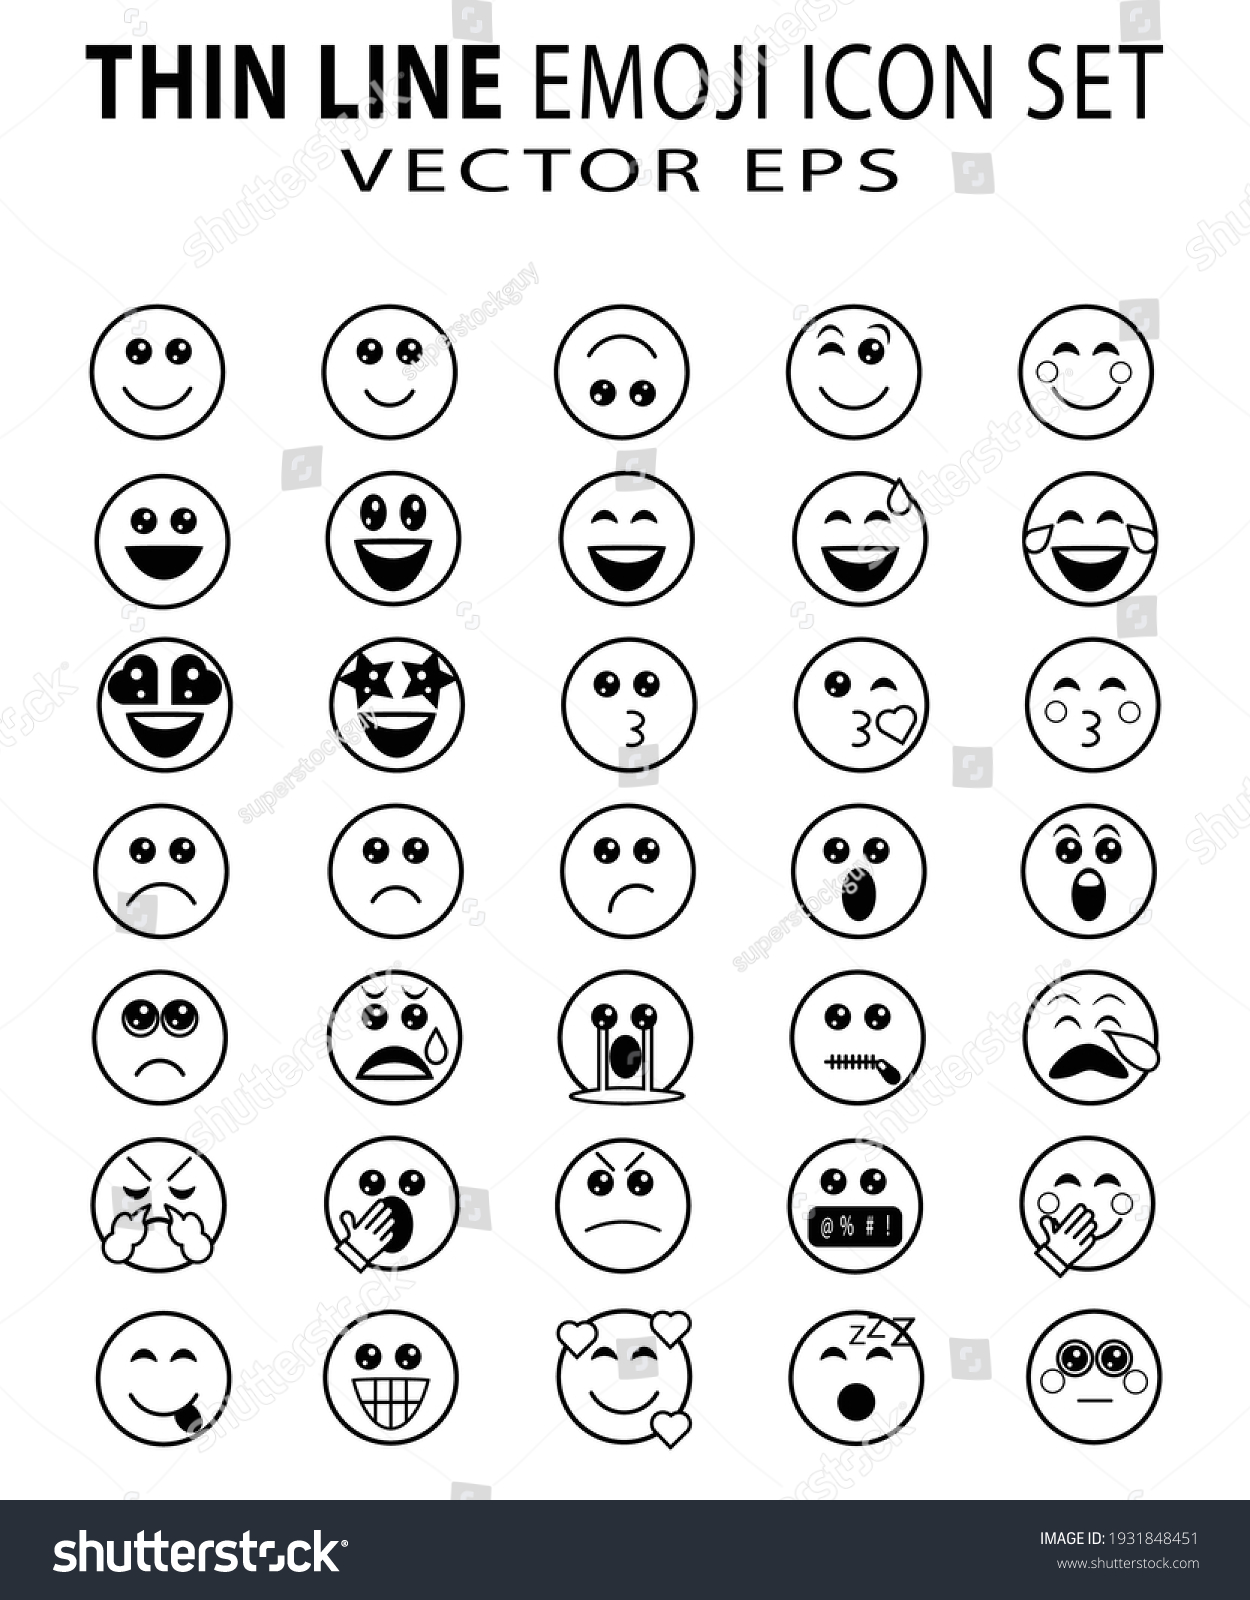 SVG of Cute thin line emoji set on white background. Royalty free and fully editable. svg